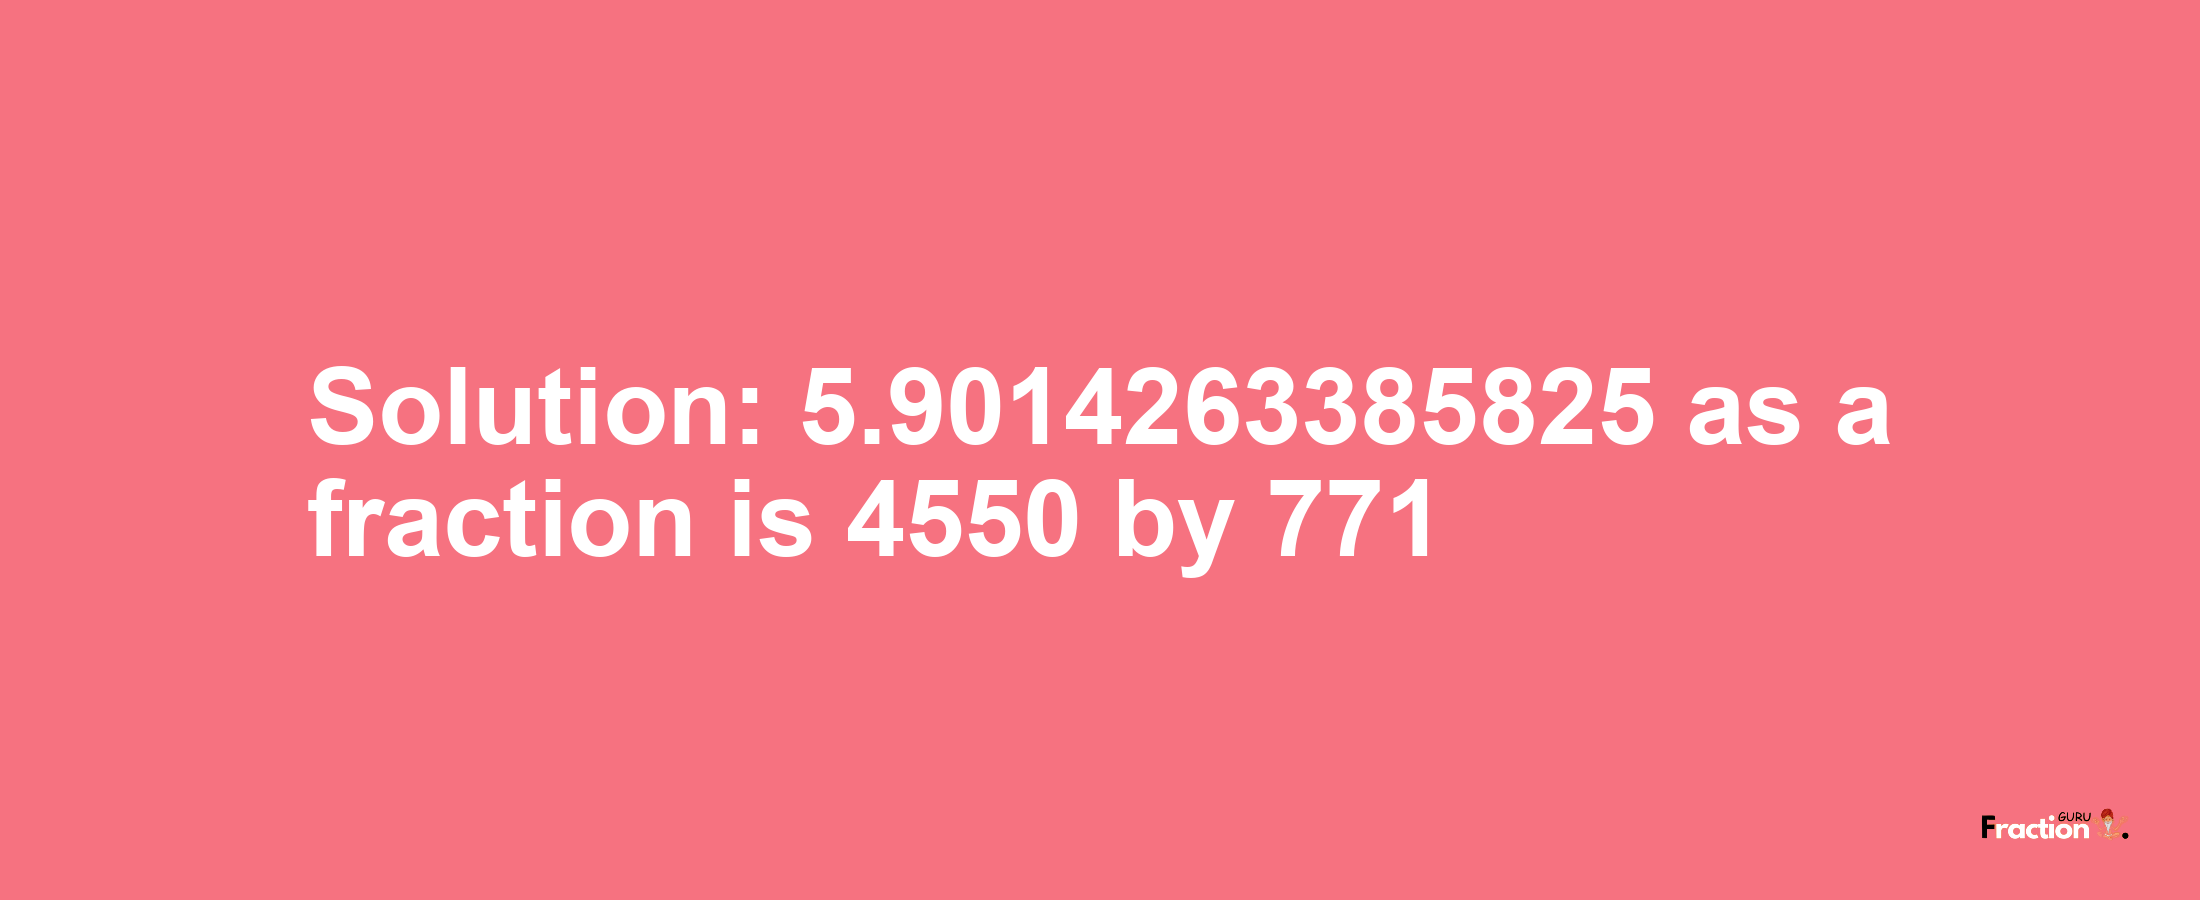 Solution:5.9014263385825 as a fraction is 4550/771